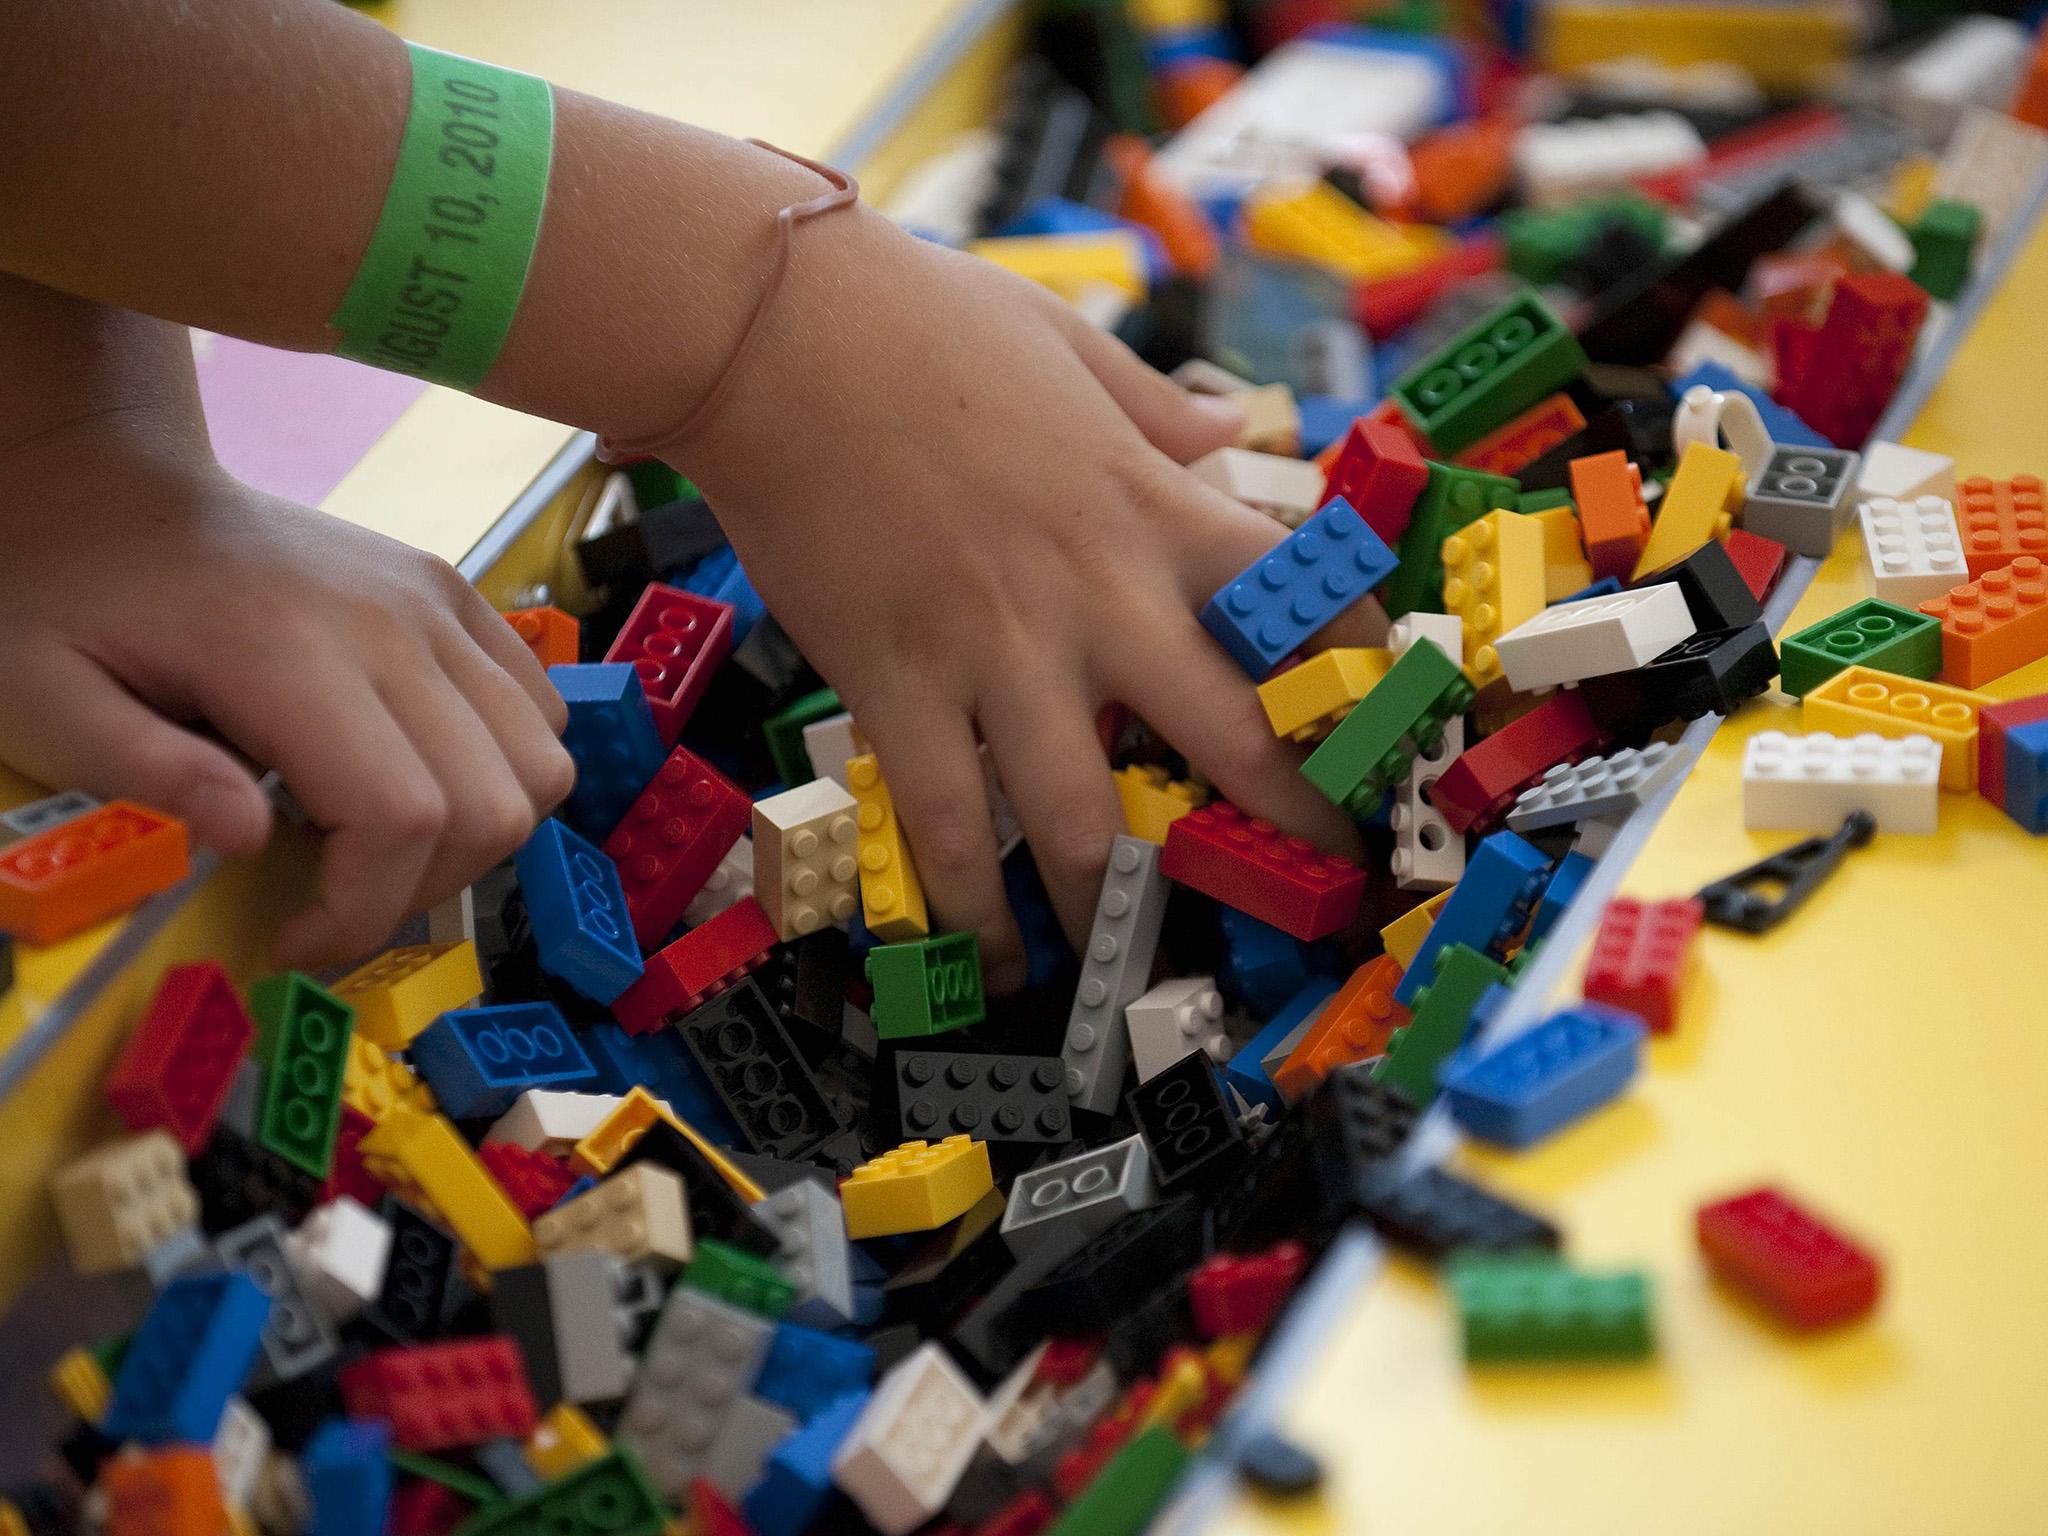 Lego has increased its sales by an annual average of 15 per cent for the past dozen years – and by a massive 25 per cent in 2015